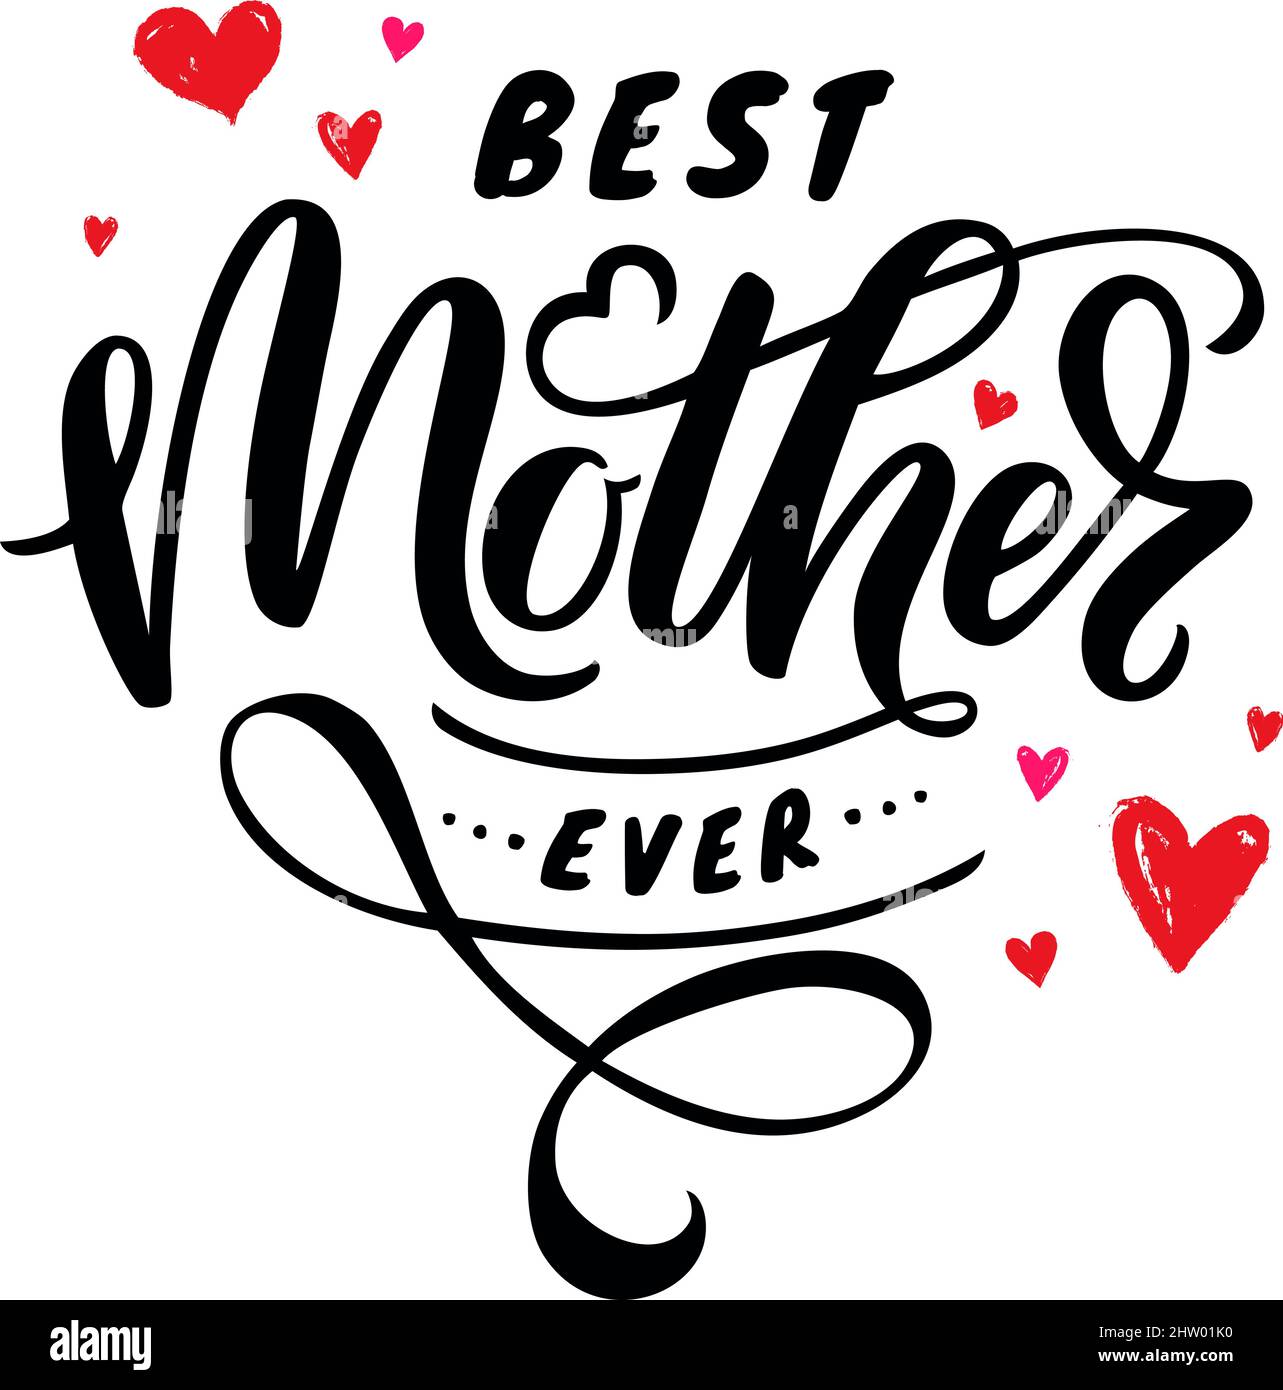 Best Mother ever - hand lettering. Illustration of quote with hearts isolated on white background. Vector design. Stock Vector